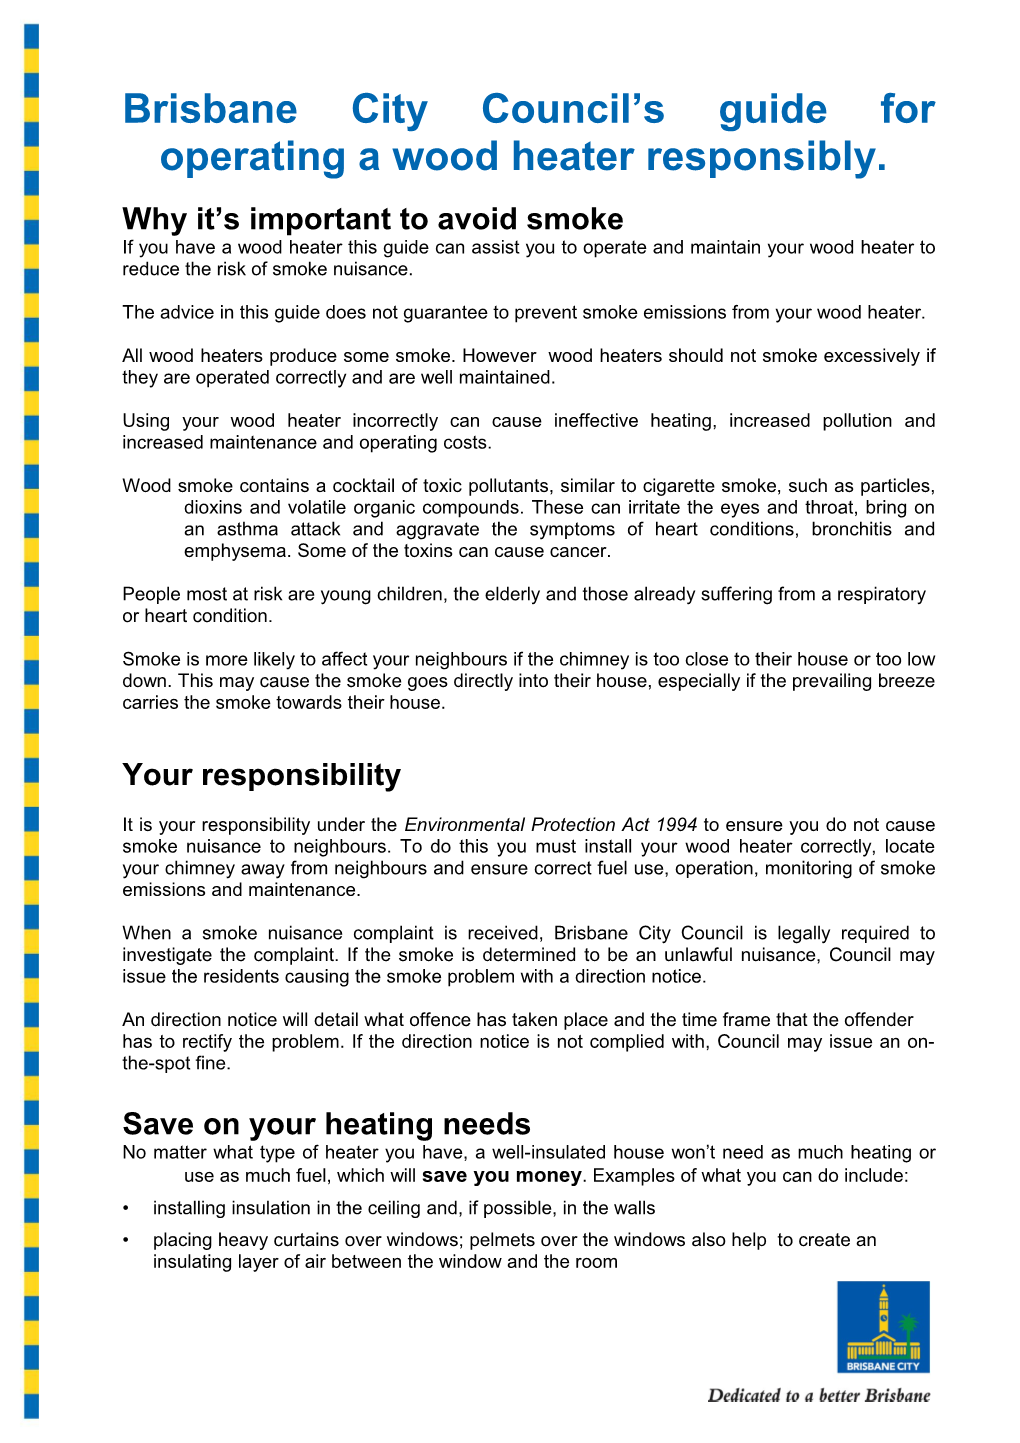 Brisbane City Council S Guide for Operating Awood Heater Responsibly